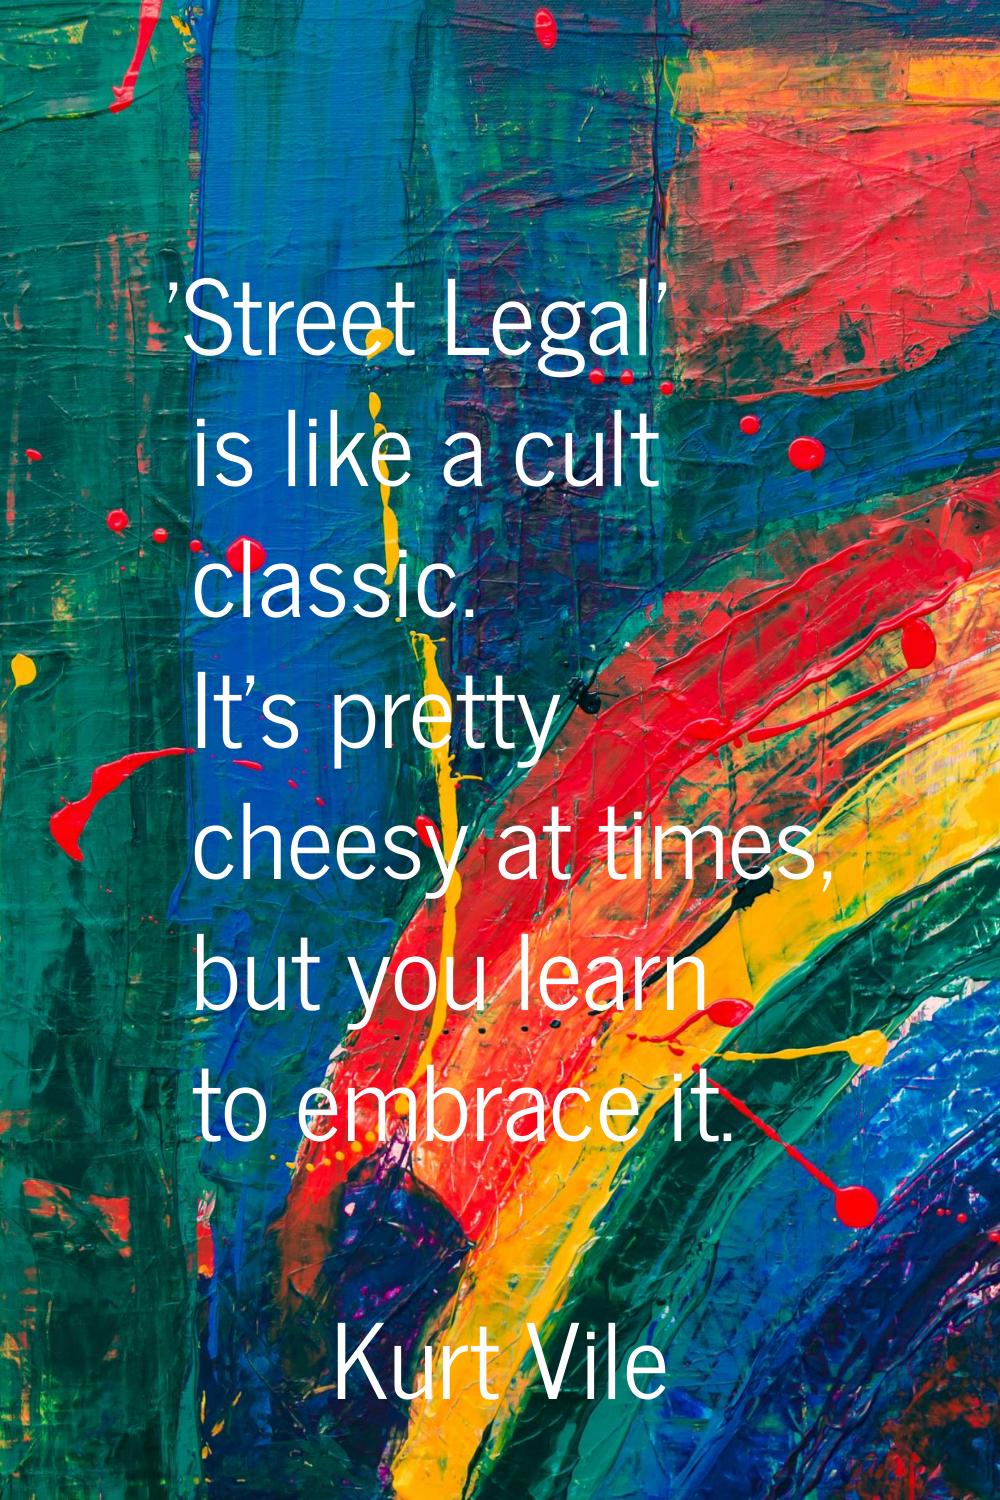 'Street Legal' is like a cult classic. It's pretty cheesy at times, but you learn to embrace it.